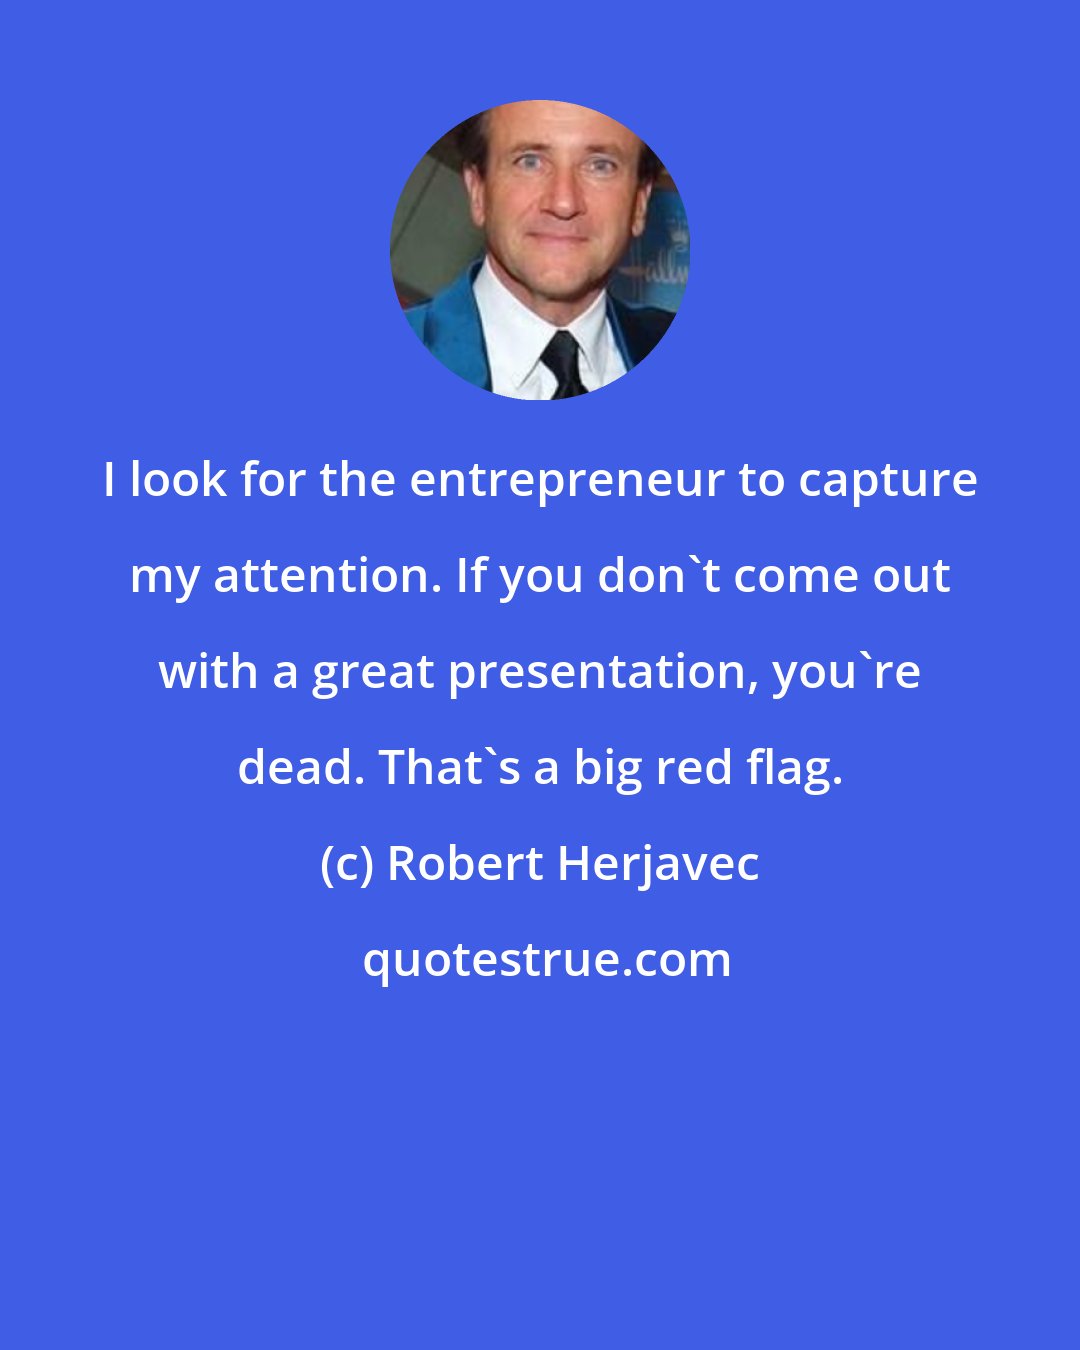 Robert Herjavec: I look for the entrepreneur to capture my attention. If you don't come out with a great presentation, you're dead. That's a big red flag.